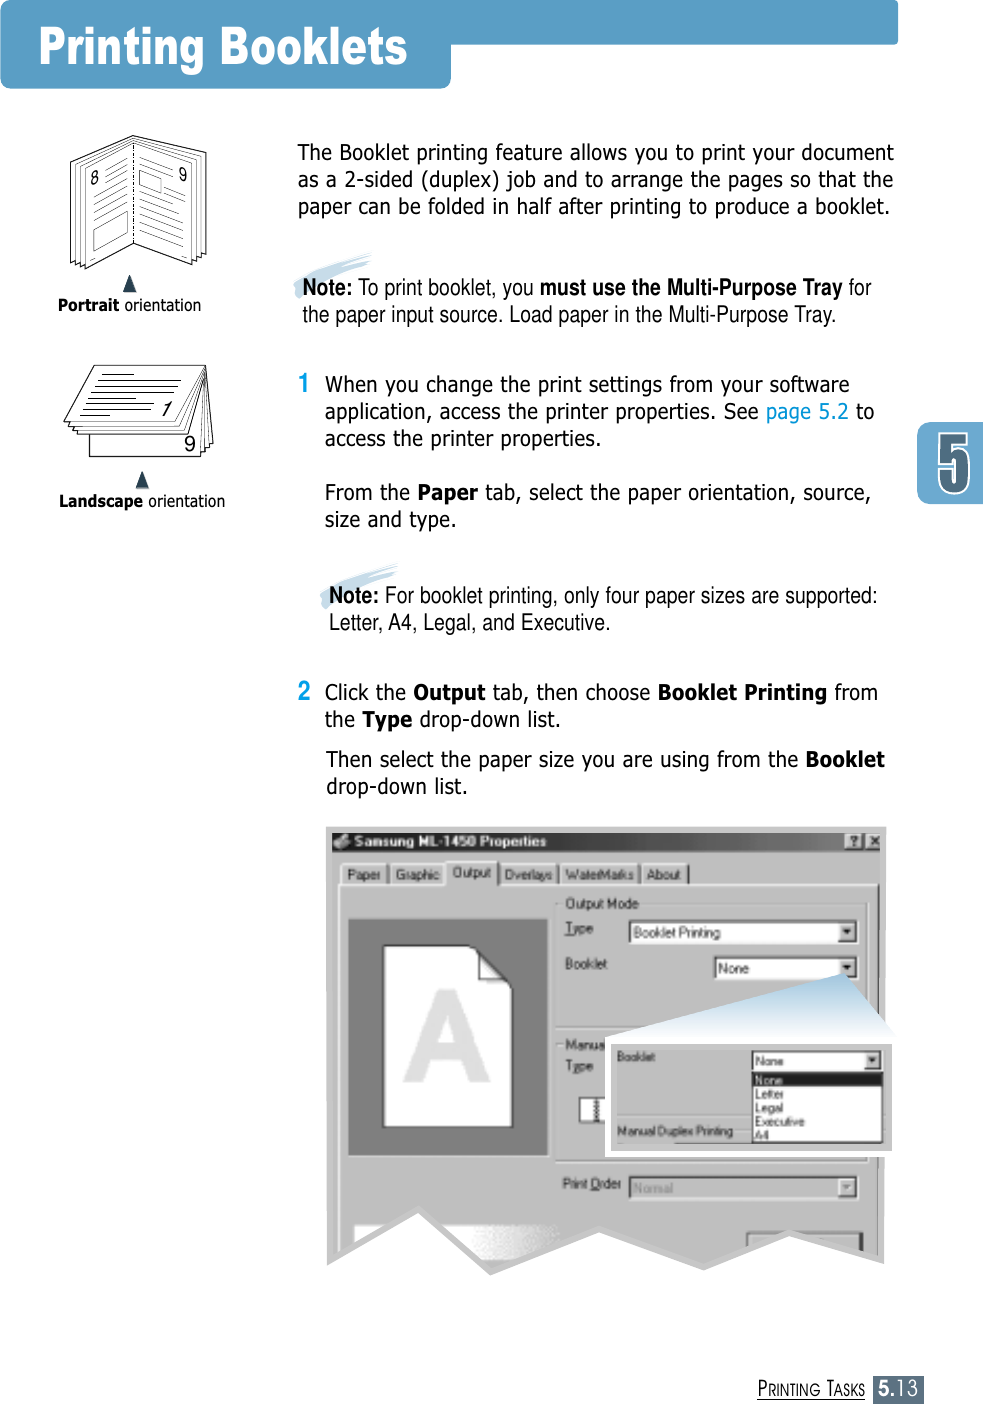 5.13PRINTING TASKS➐➐➐➐Portrait orientationPrinting Booklets89➐➐➐➐Landscape orientation719The Booklet printing feature allows you to print your documentas a 2-sided (duplex) job and to arrange the pages so that thepaper can be folded in half after printing to produce a booklet. 1When you change the print settings from your softwareapplication, access the printer properties. See page 5.2 toaccess the printer properties.From the Paper tab, select the paper orientation, source,size and type.2Click the Output tab, then choose Booklet Printing fromthe Type drop-down list. Then select the paper size you are using from the Bookletdrop-down list.Note: For booklet printing, only four paper sizes are supported:Letter, A4, Legal, and Executive.Note: To print booklet, you must use the Multi-Purpose Tray forthe paper input source. Load paper in the Multi-Purpose Tray.